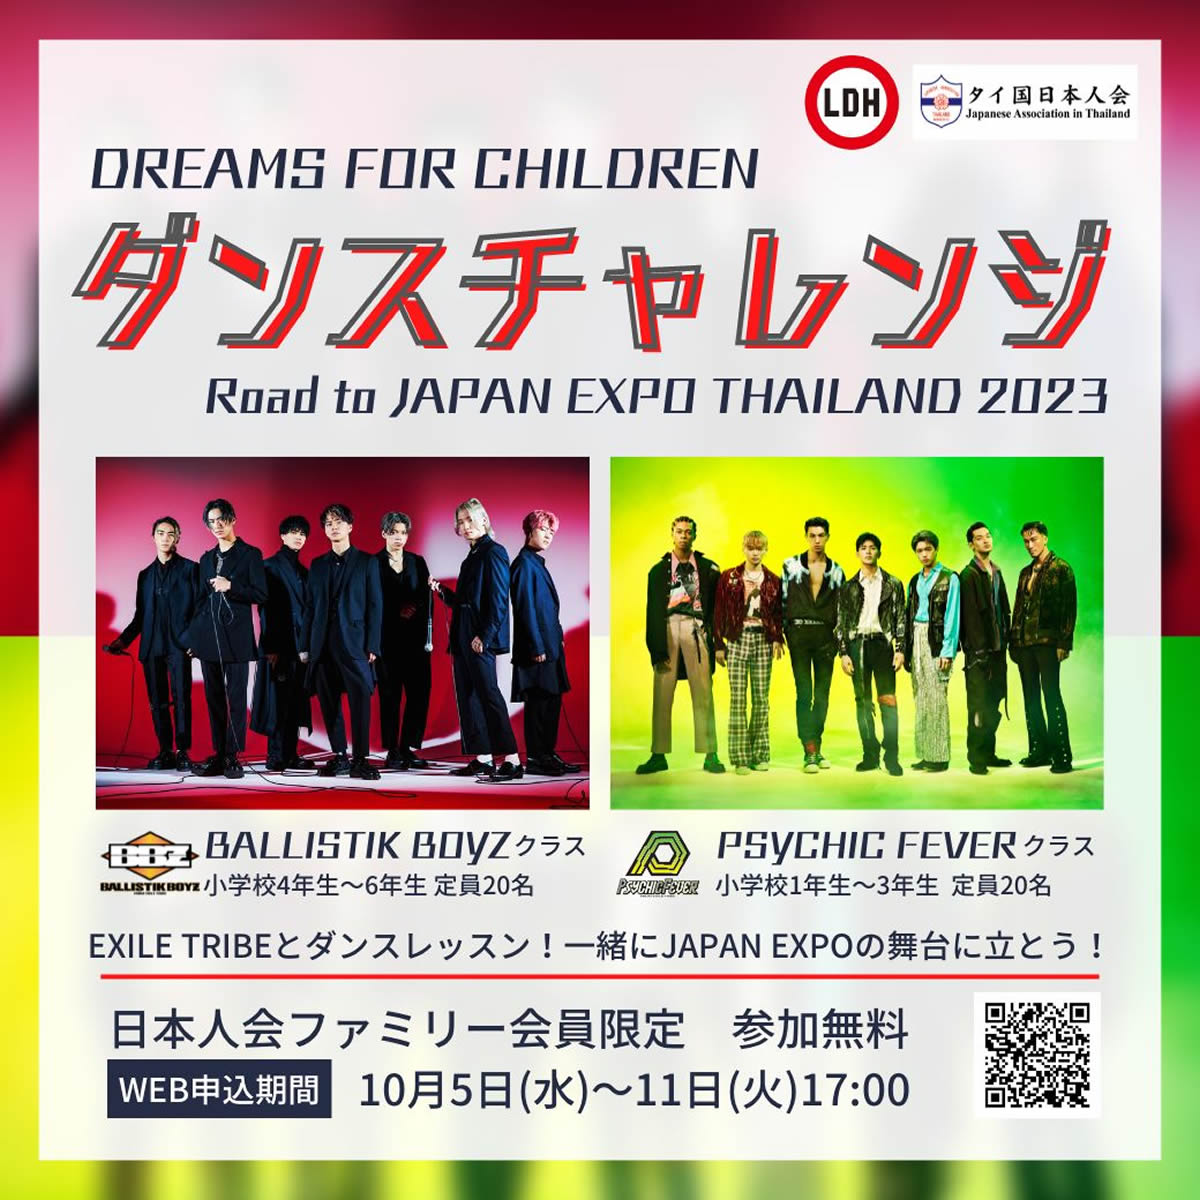 EXILE TRIBEの無料ダンスレッスン「ダンスチャレンジ Road to JAPAN EXPO THAILAND 2023」開催